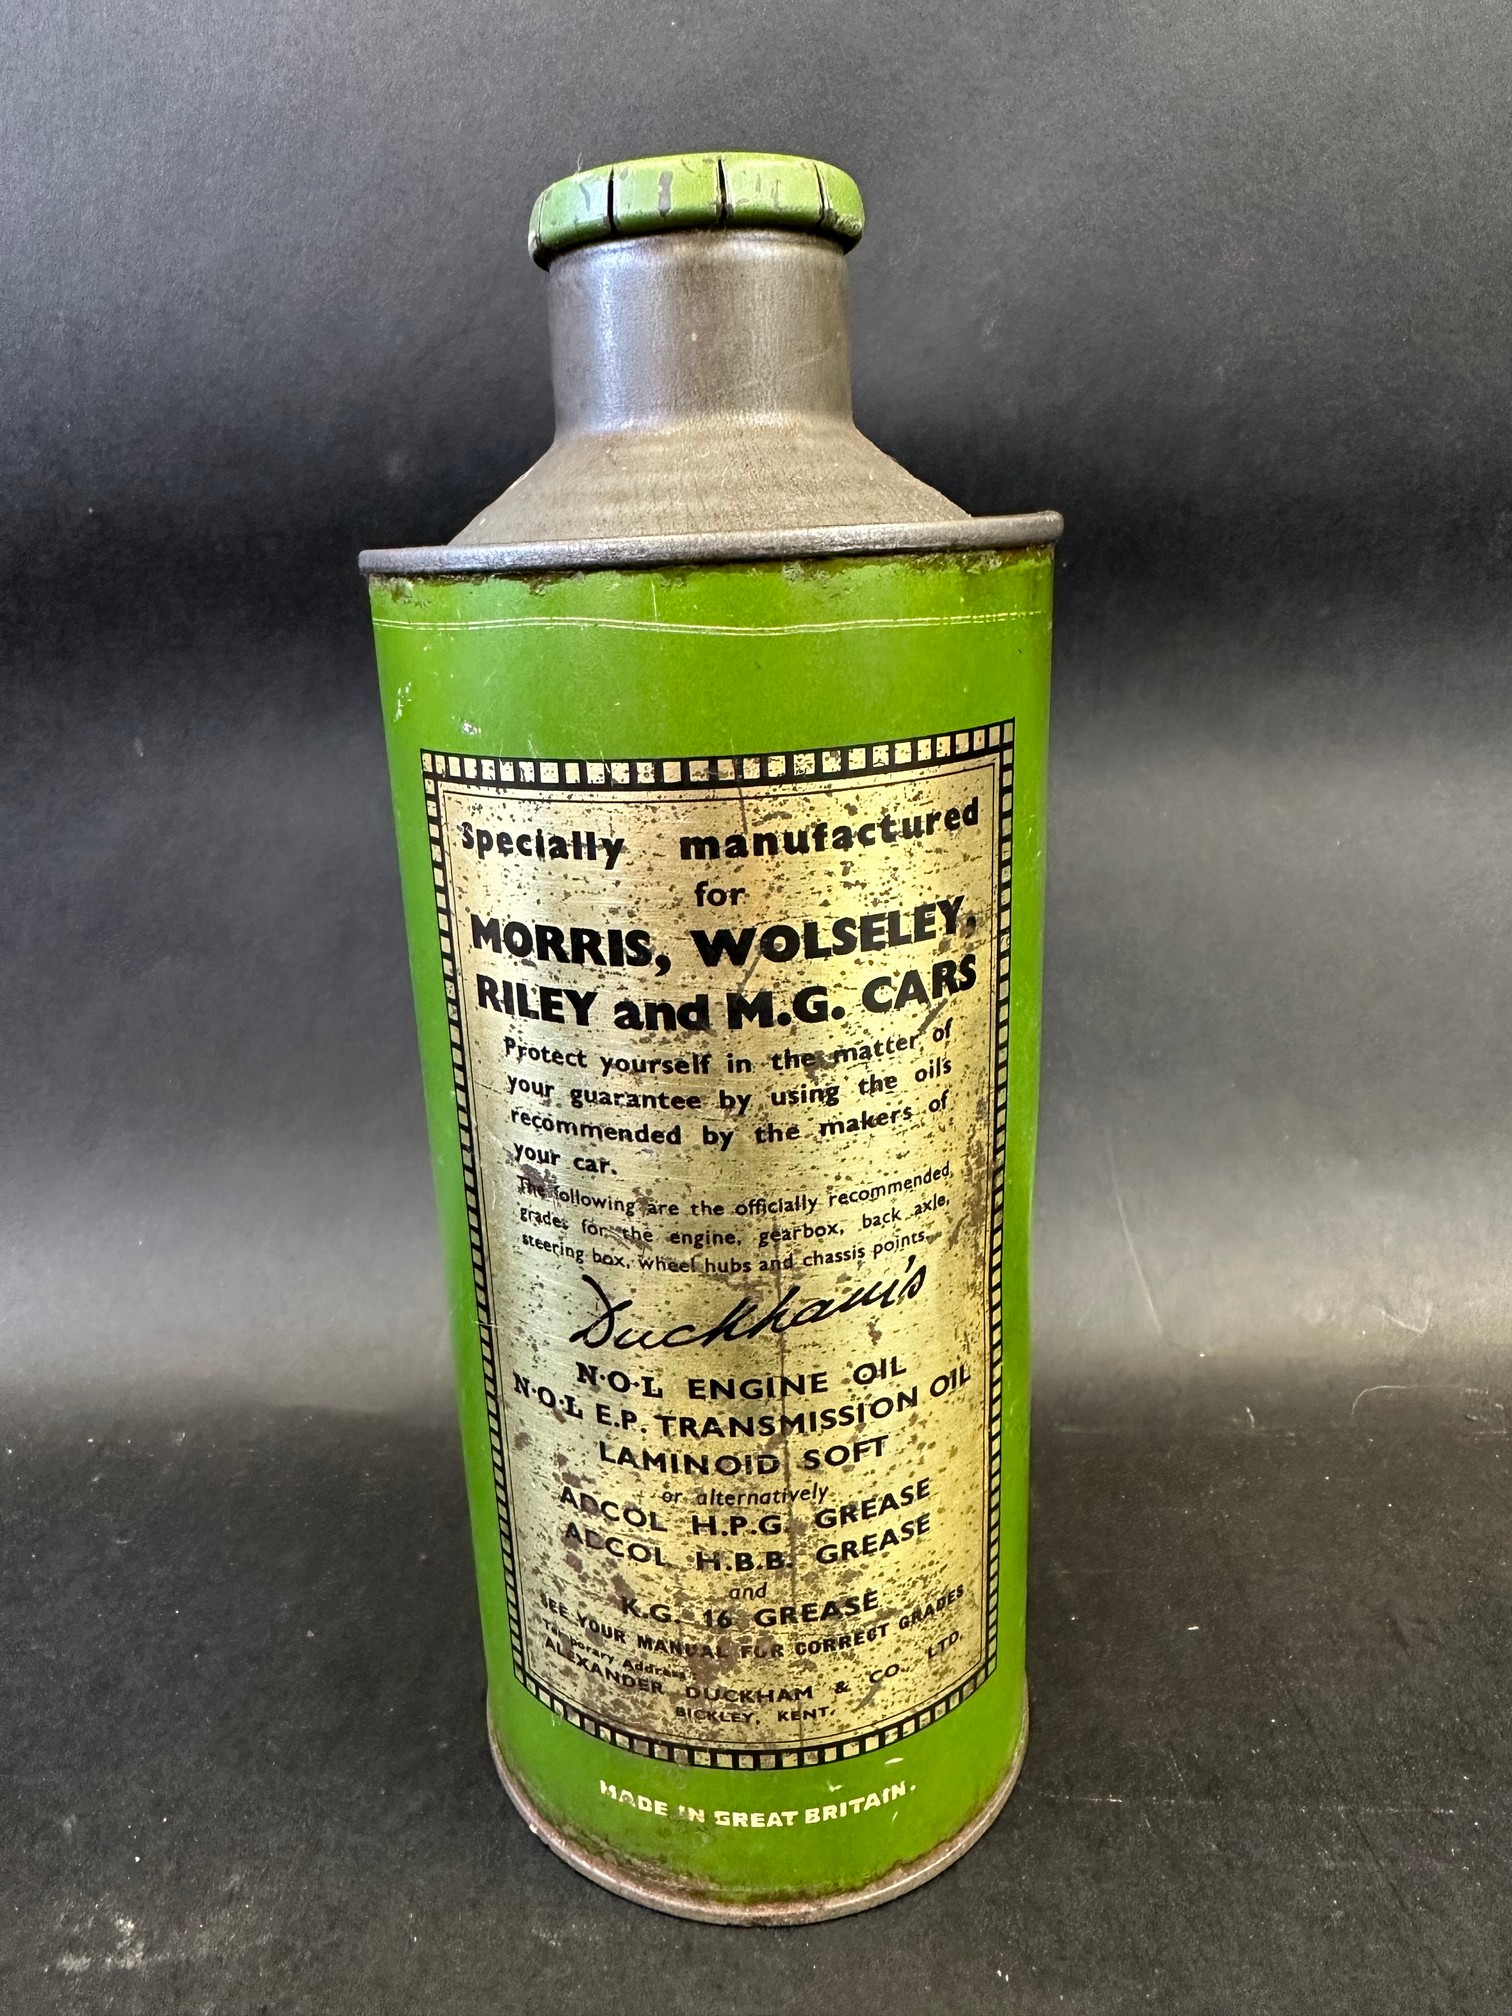 A Duckhams NOL Engine Oil quart cylindrical oil can, specified by the Morris, Wolseley, Riley and - Image 2 of 4